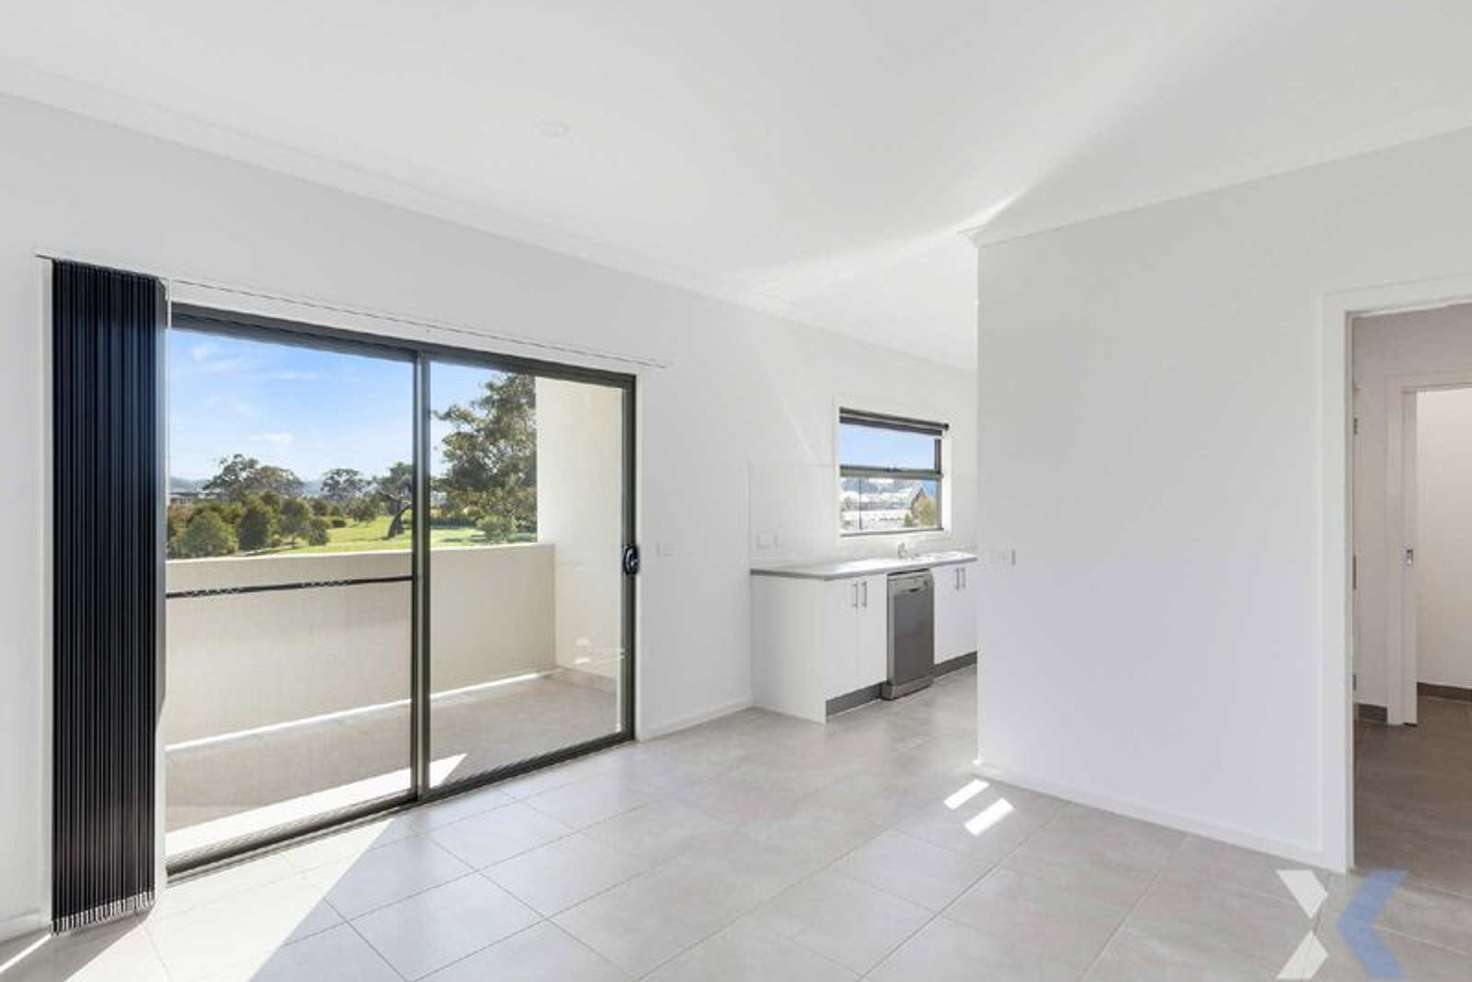 Main view of Homely townhouse listing, 14 Tata Way, Doreen VIC 3754